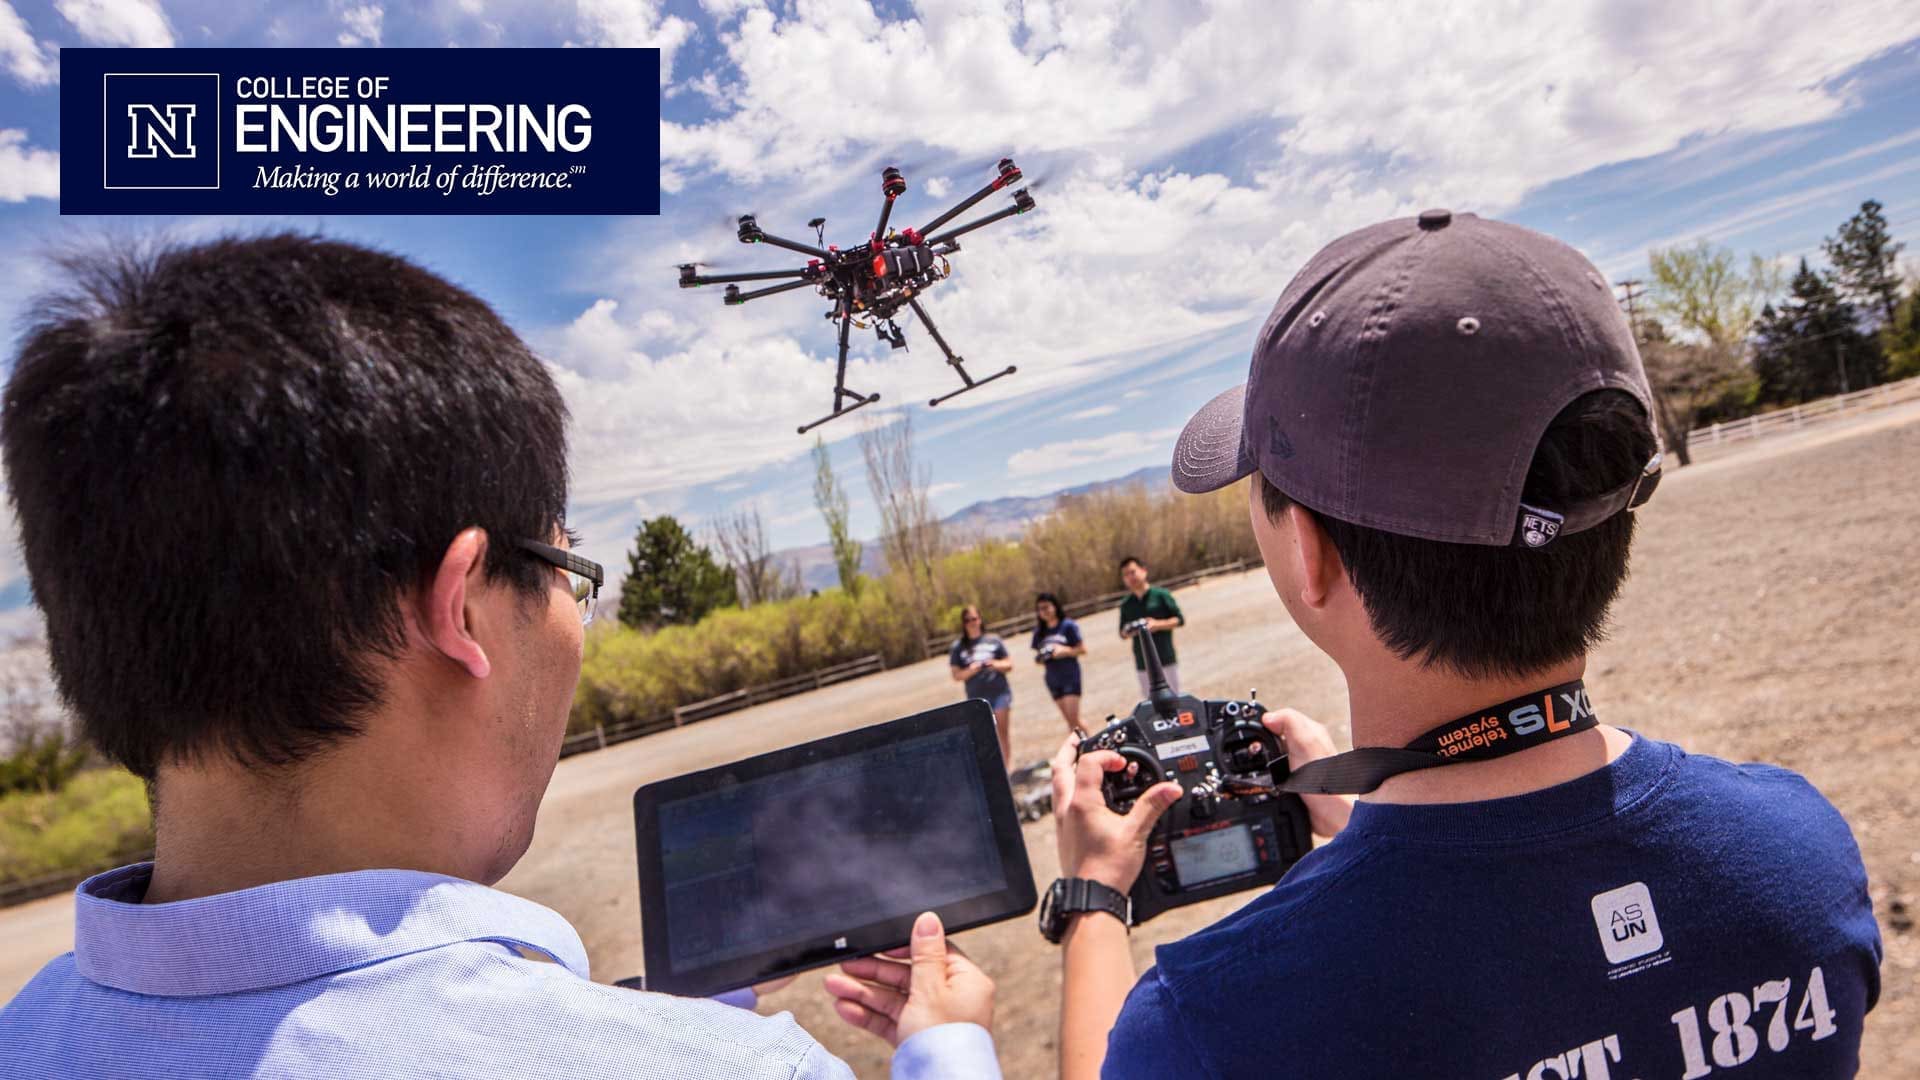 Students flying a drone with College of Engineering logo